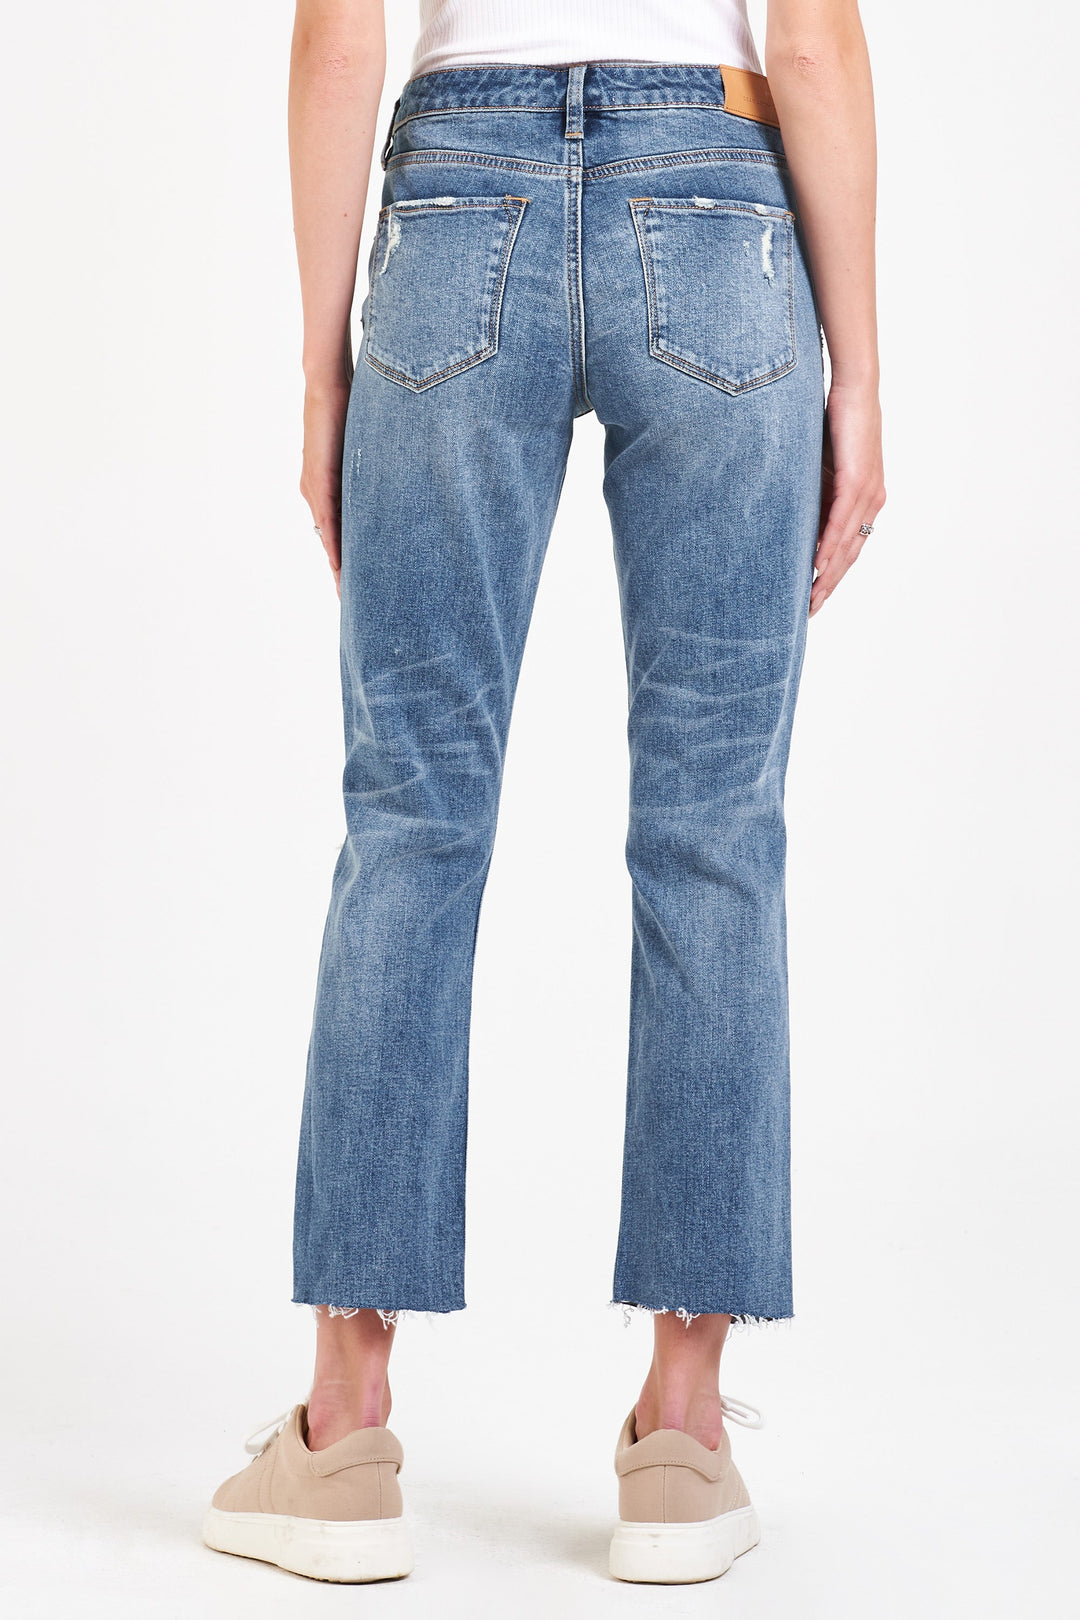 image of a female model wearing a BLAIRE HIGH RISE ANKLE SLIM STRAIGHT LEG JEANS CENTRAL AVENUE JEANS